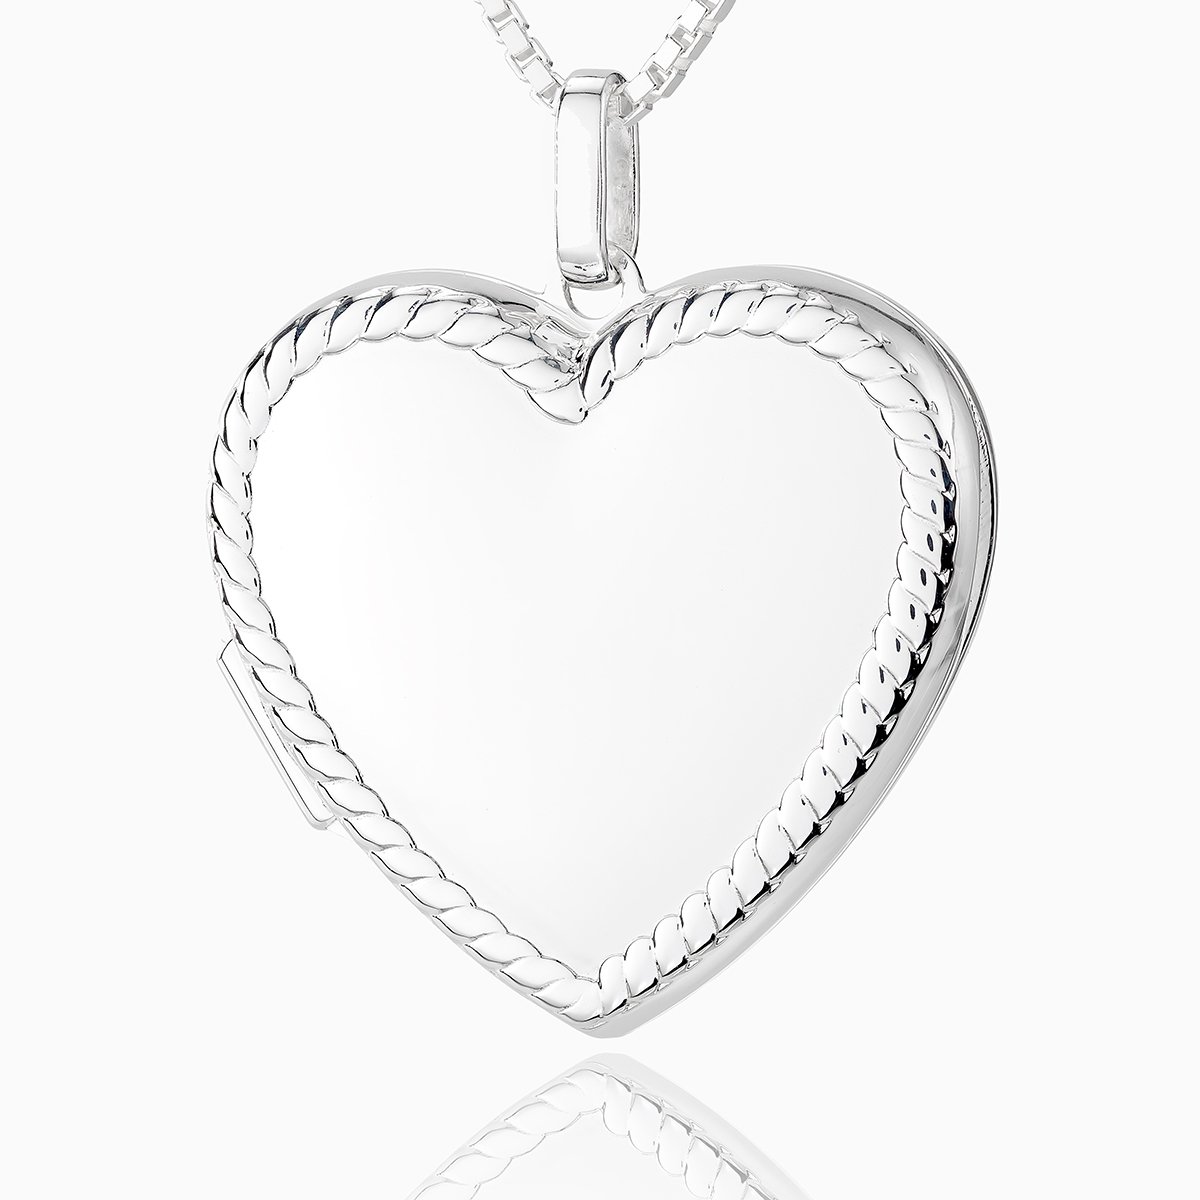 Front shot of a large heart-shaped sterling silver locket with a rope twist border design, set on a serling silver box chain